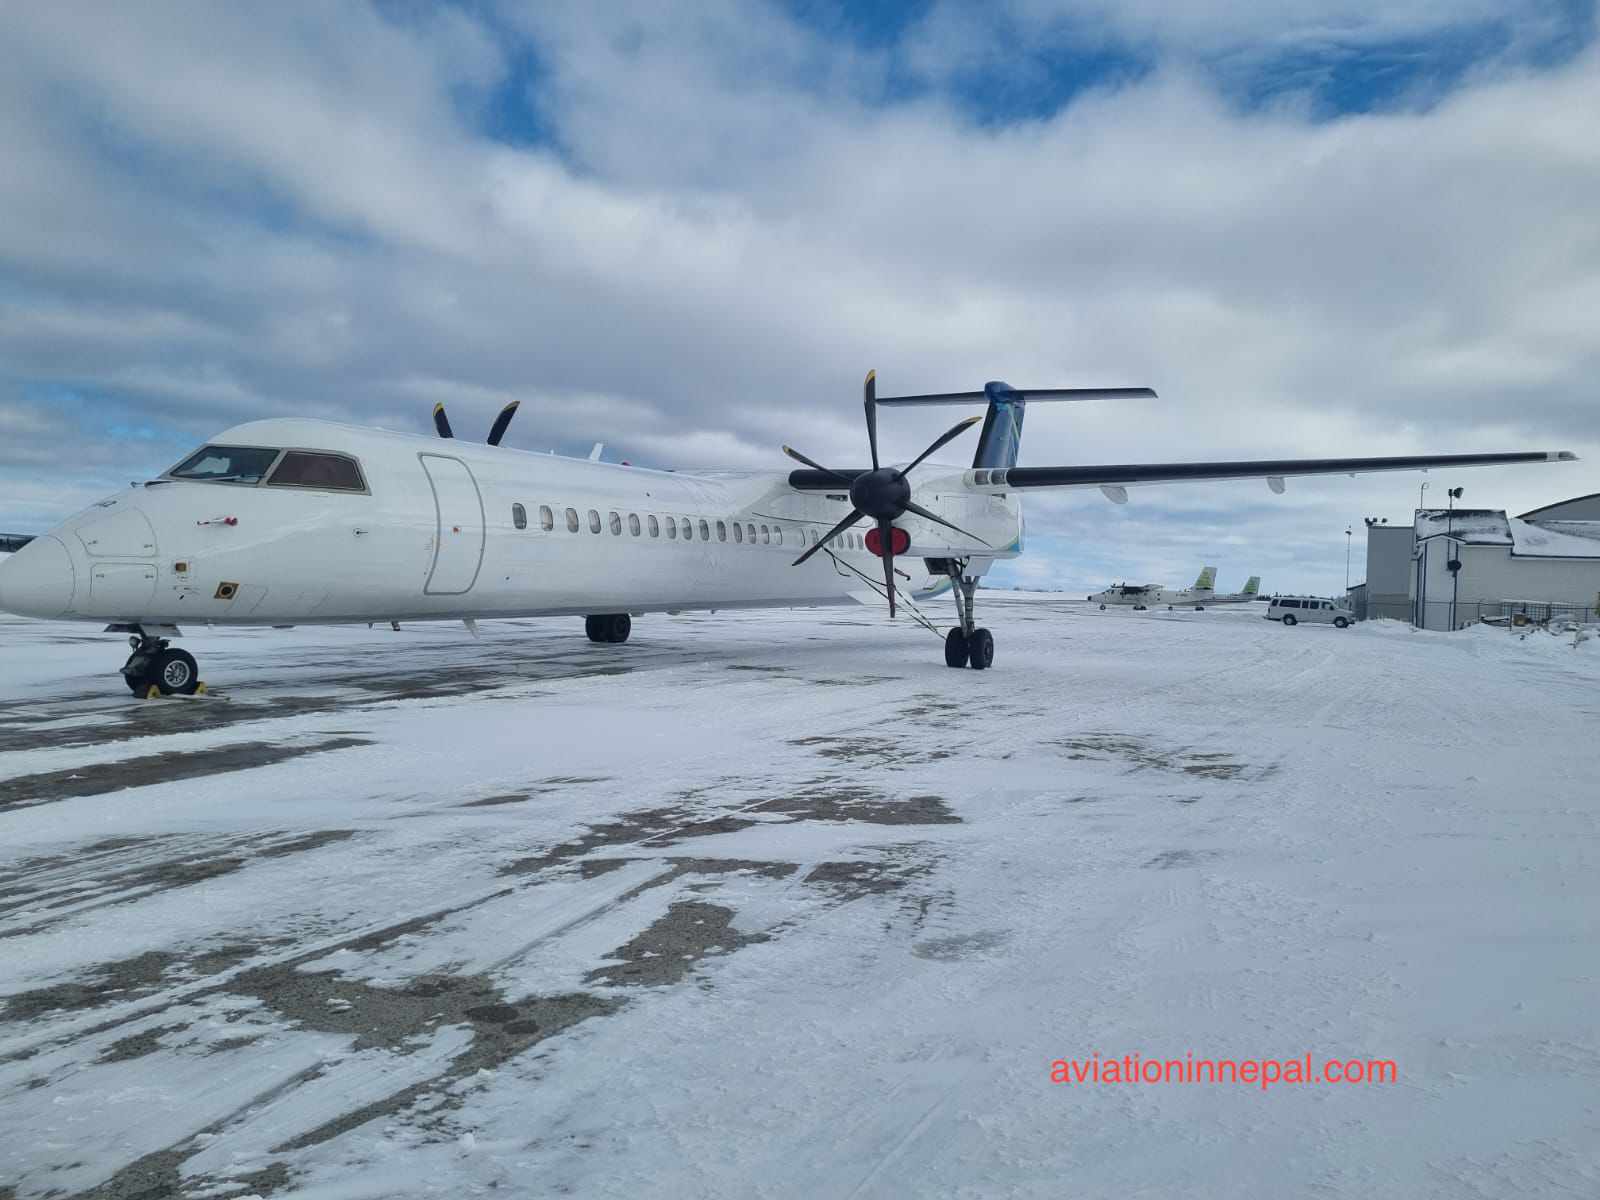 Shree Airlines New Dash 8 Q400 - Aviation in Nepal